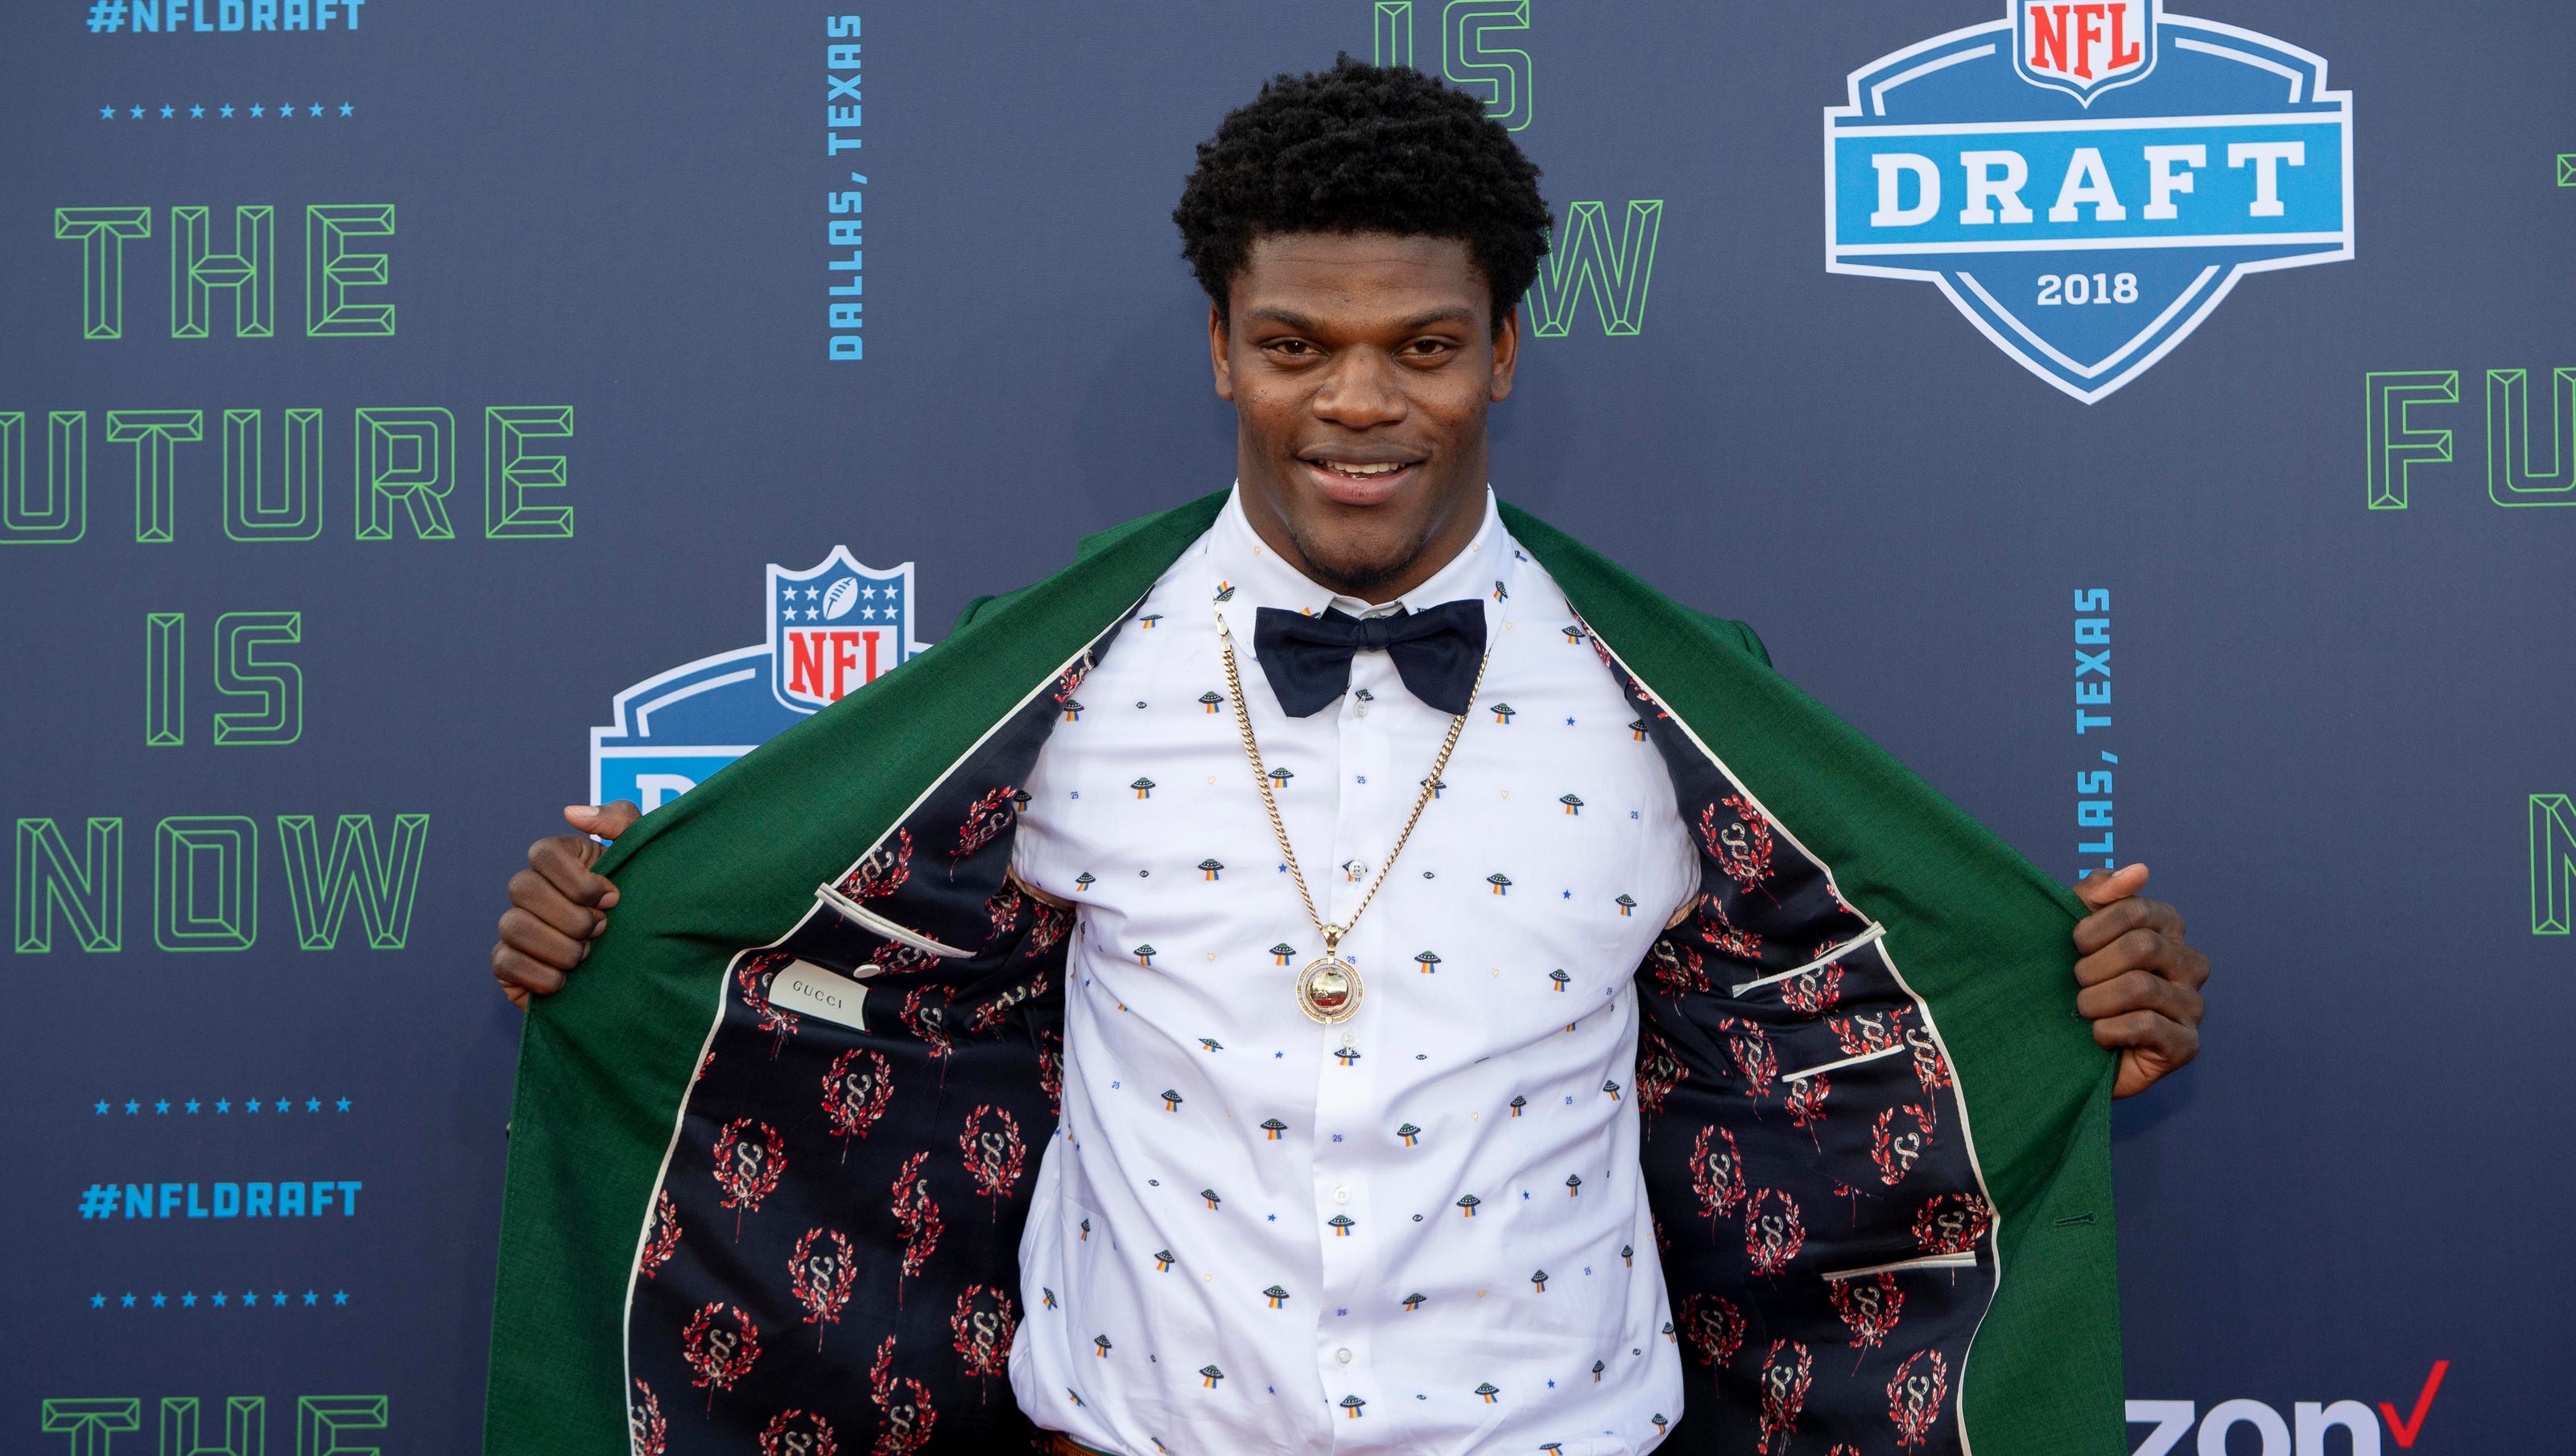 Lamar Jackson hits the NFL draft red carpet in all green suit